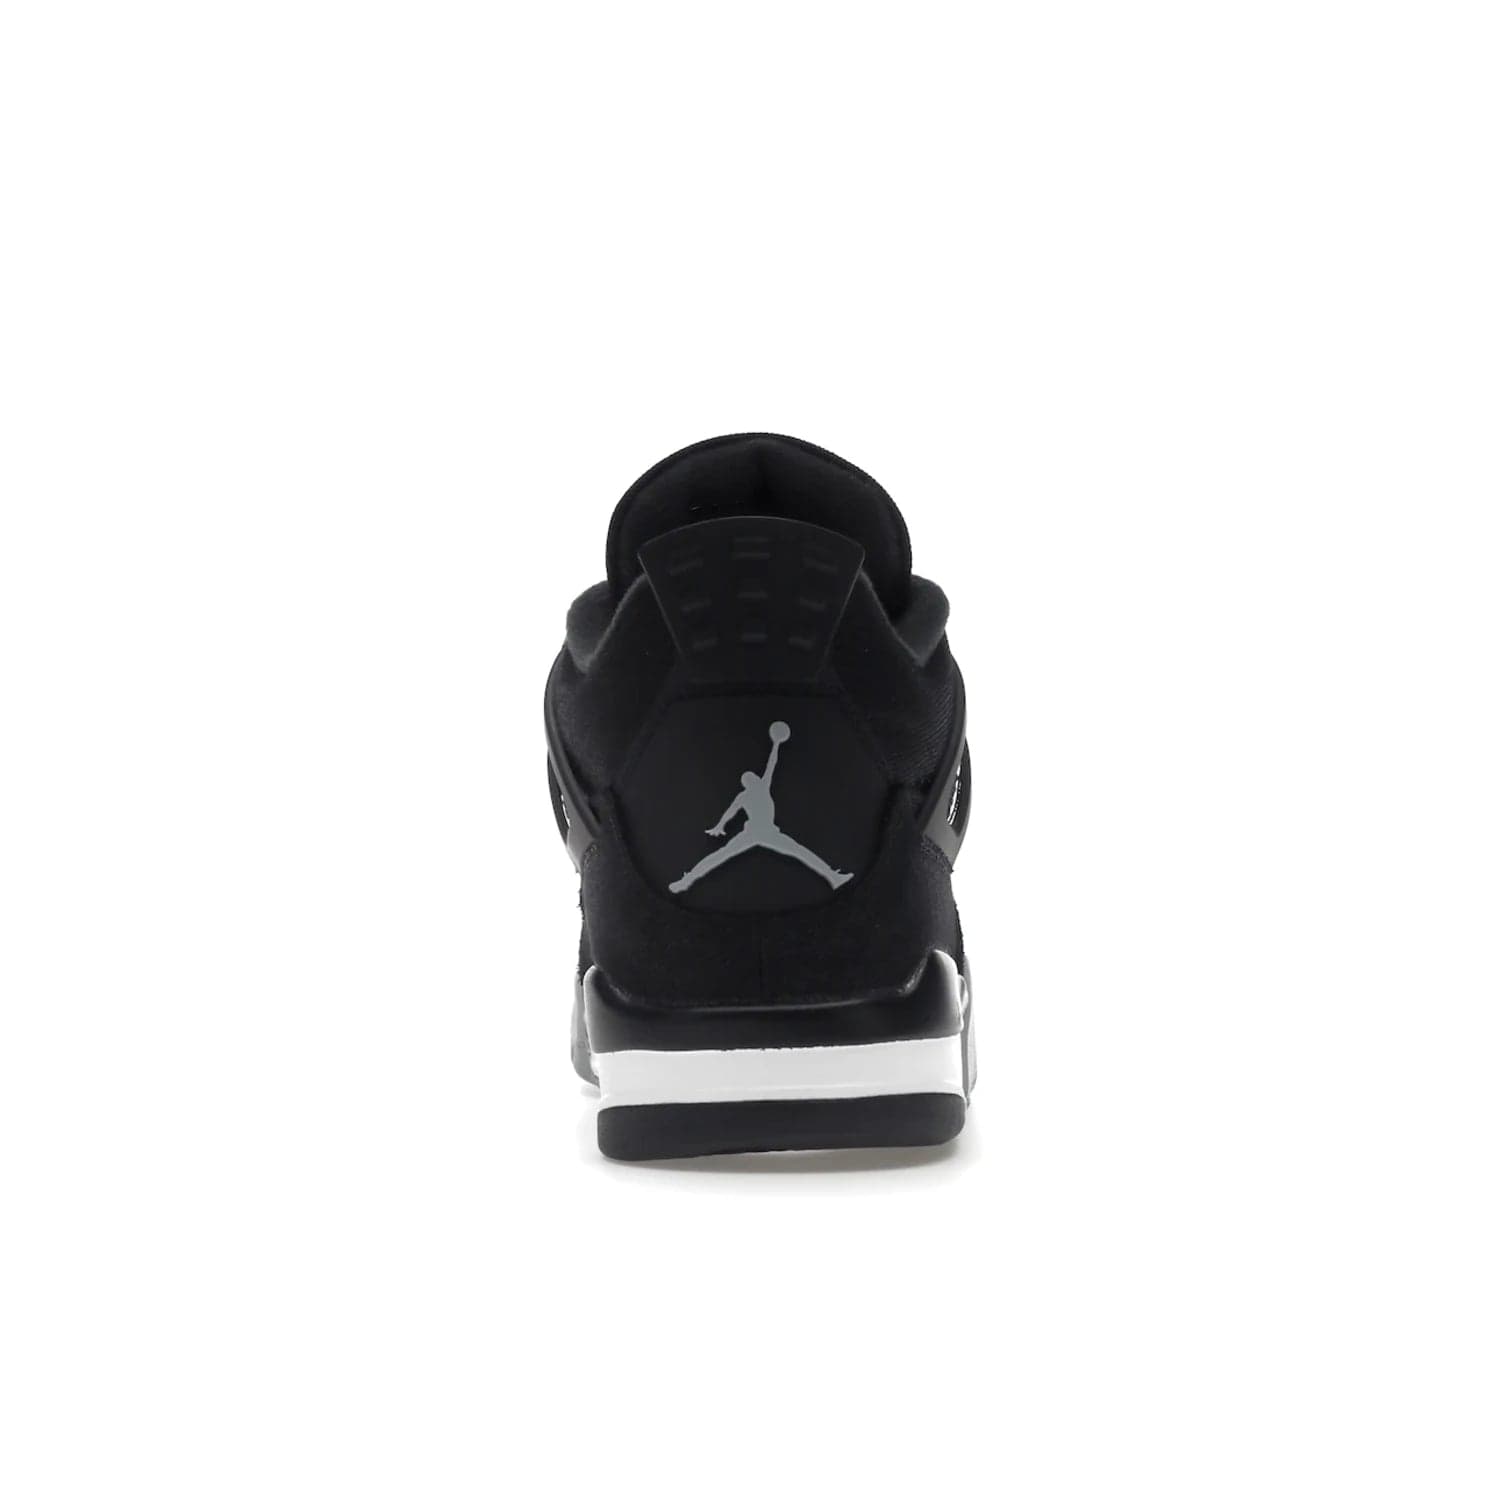 Jordan 4 Retro SE Black Canvas - Image 28 - Only at www.BallersClubKickz.com - The Air Jordan 4 Retro SE Black Canvas brings timeless style and modern luxury. Classic mid-top sneaker in black canvas and grey suede with tonal Jumpman logo, Flight logo and polyurethane midsole with visible Air-sole cushioning. Refresh your sneaker collection and rock the Air Jordan 4 Retro SE Black Canvas.